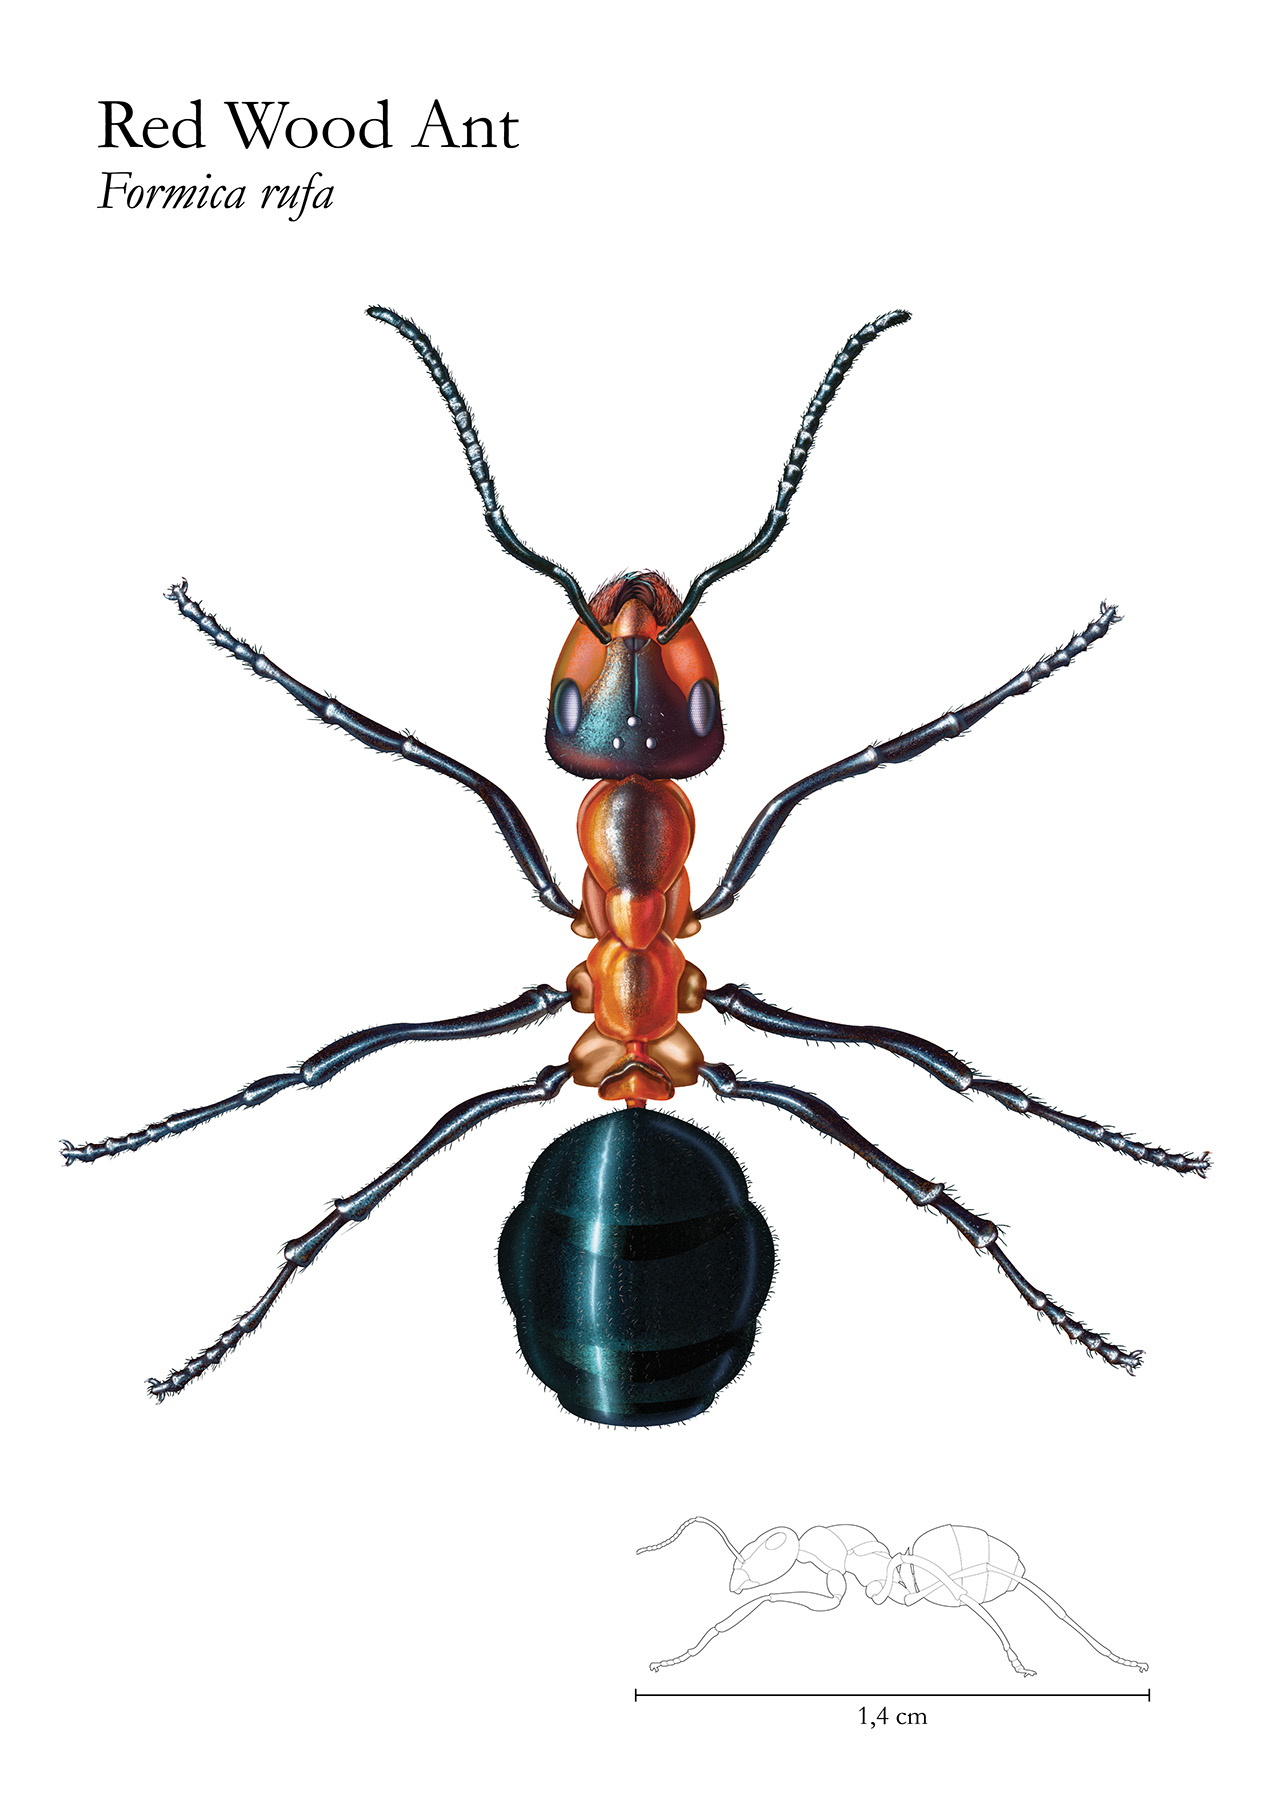 The Red Wood Ant is a common insect living in the woods recognizable with its red body and black head and back body